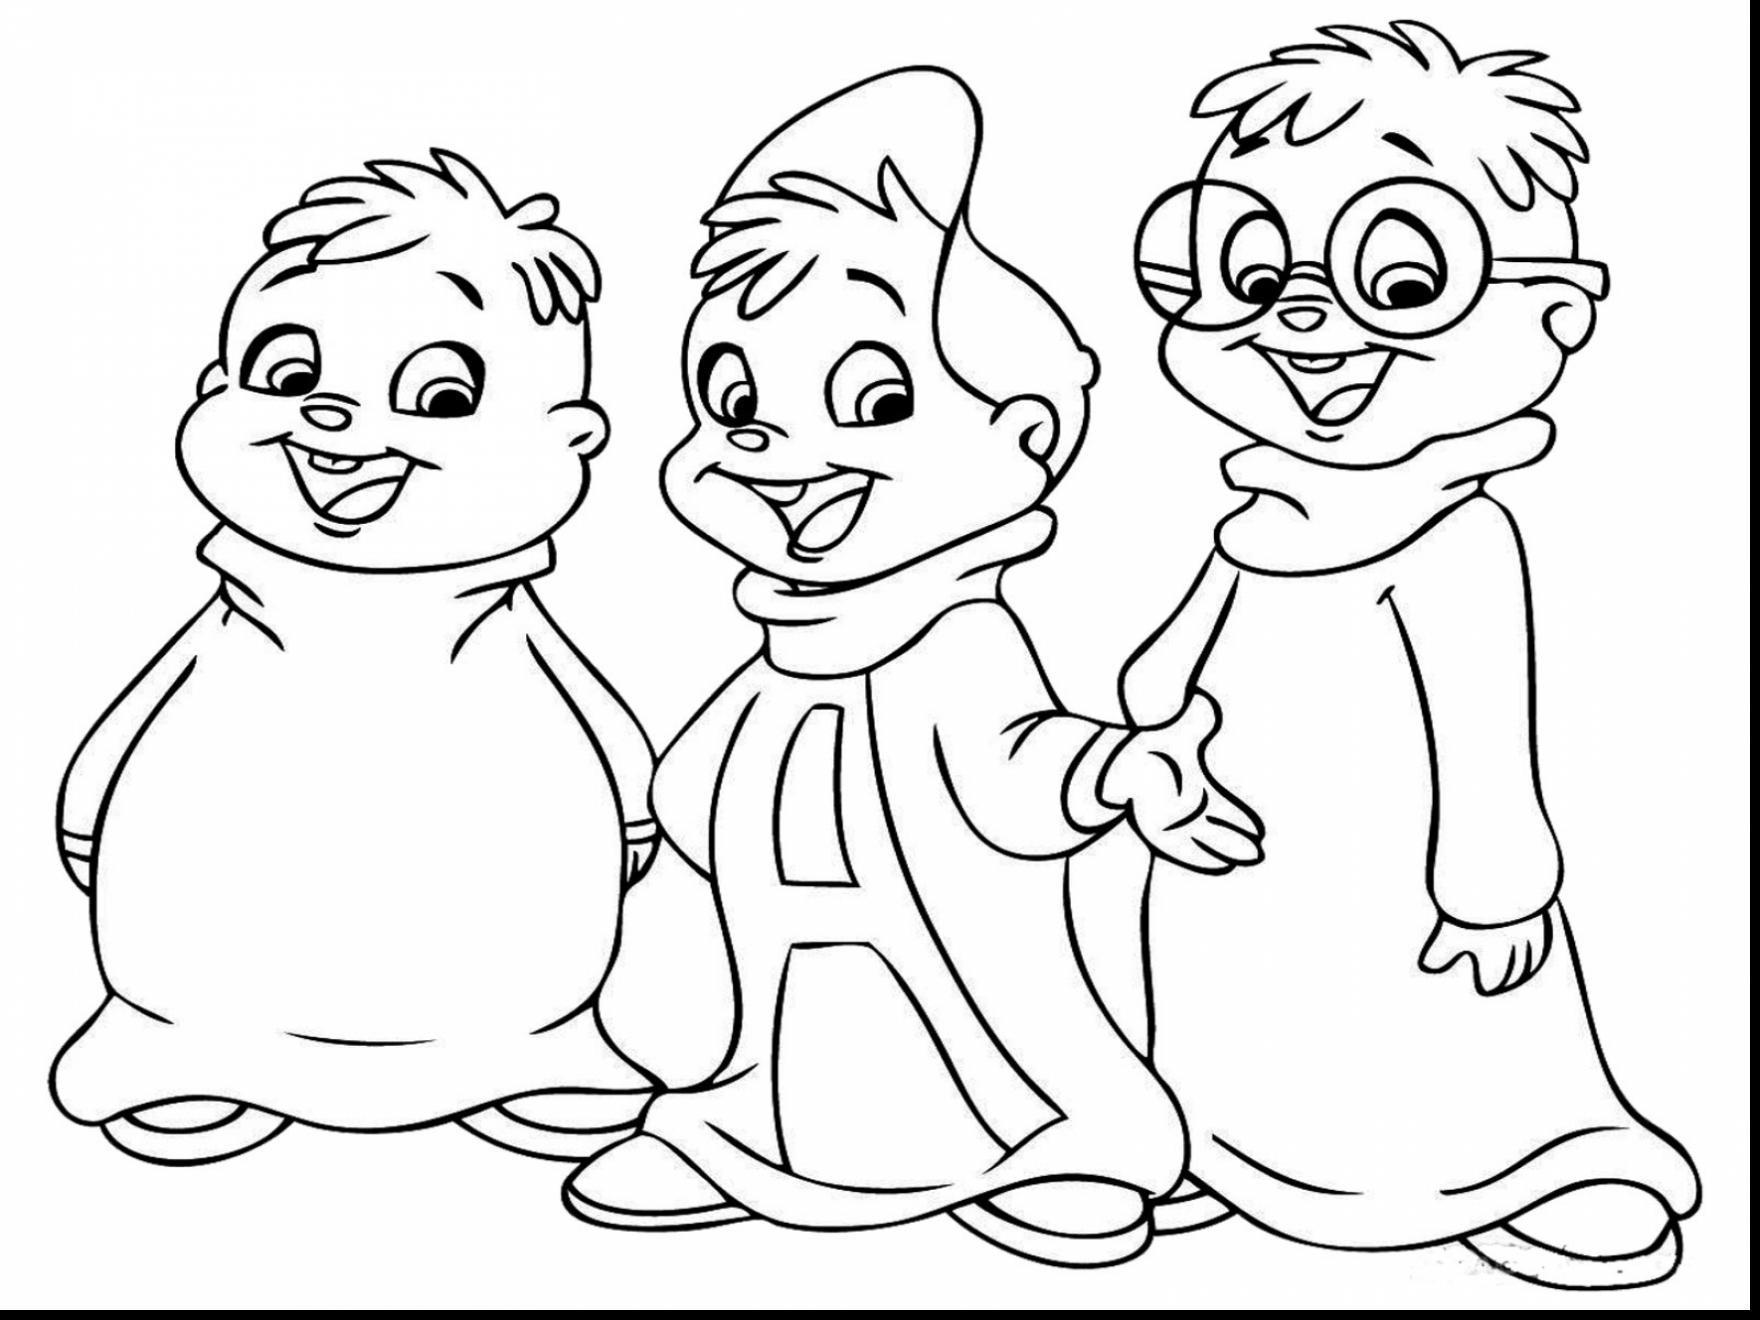 Baloo Coloring Pages at GetDrawings | Free download